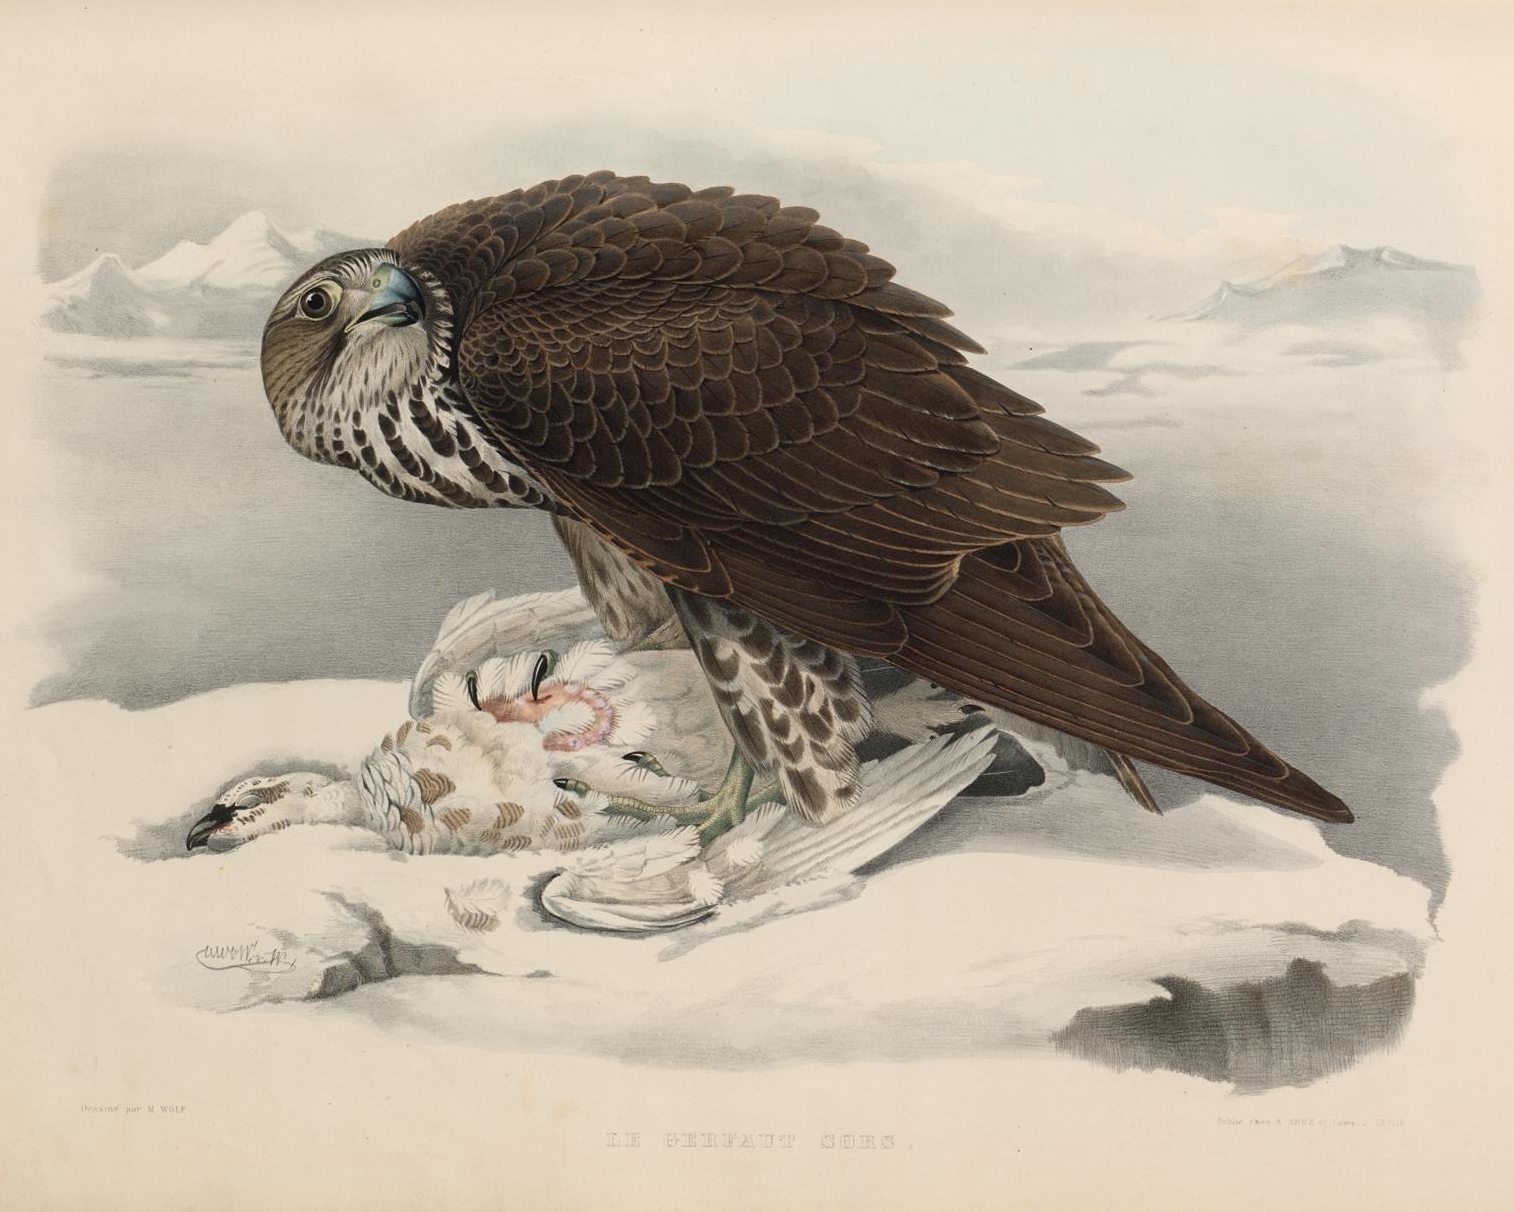 lithograph of crouched raptor